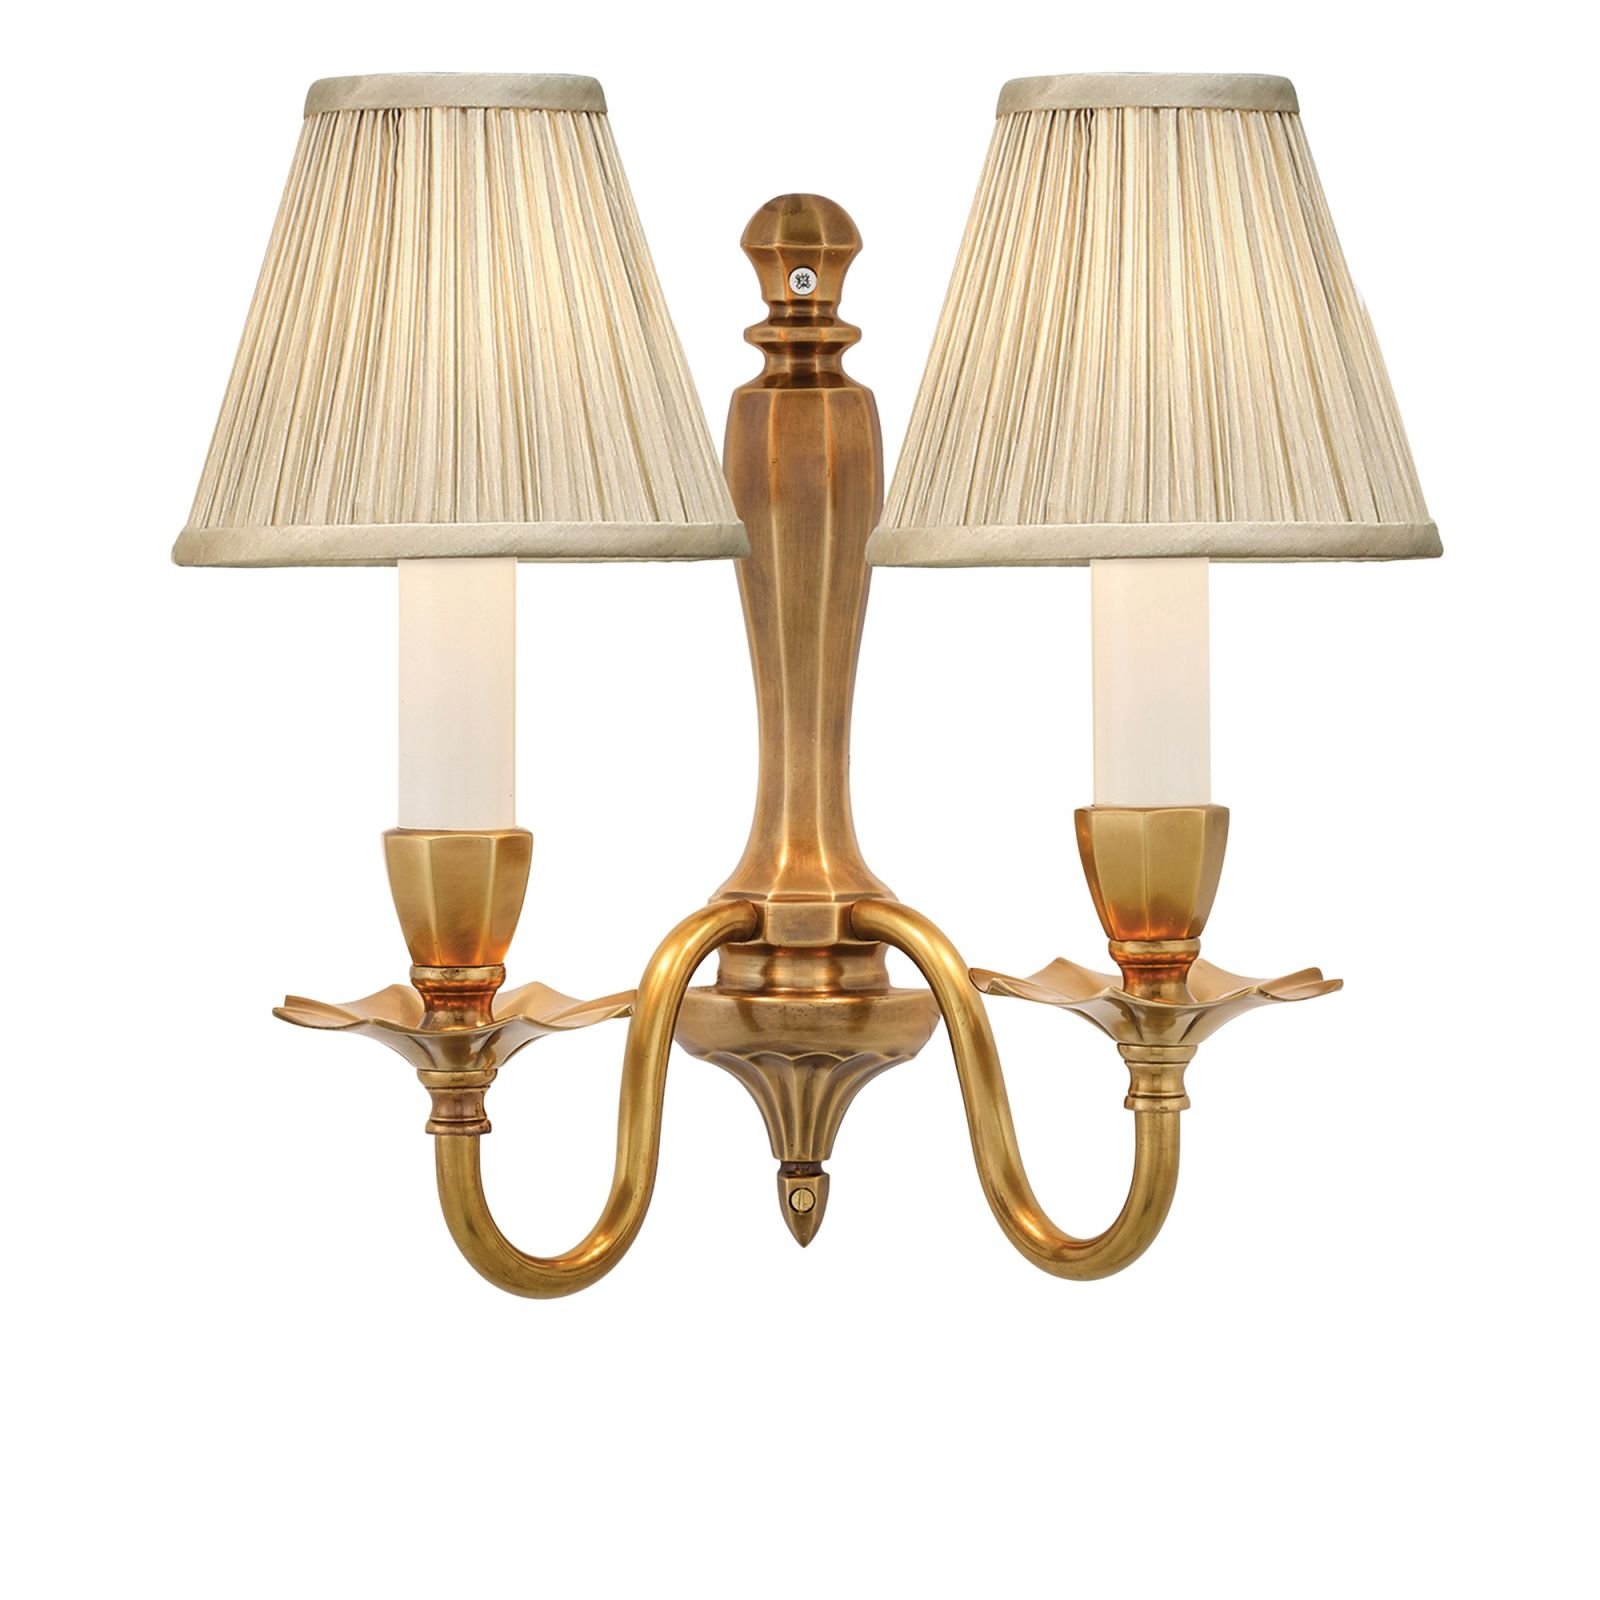 Asquith twin wall light with or without beige shades